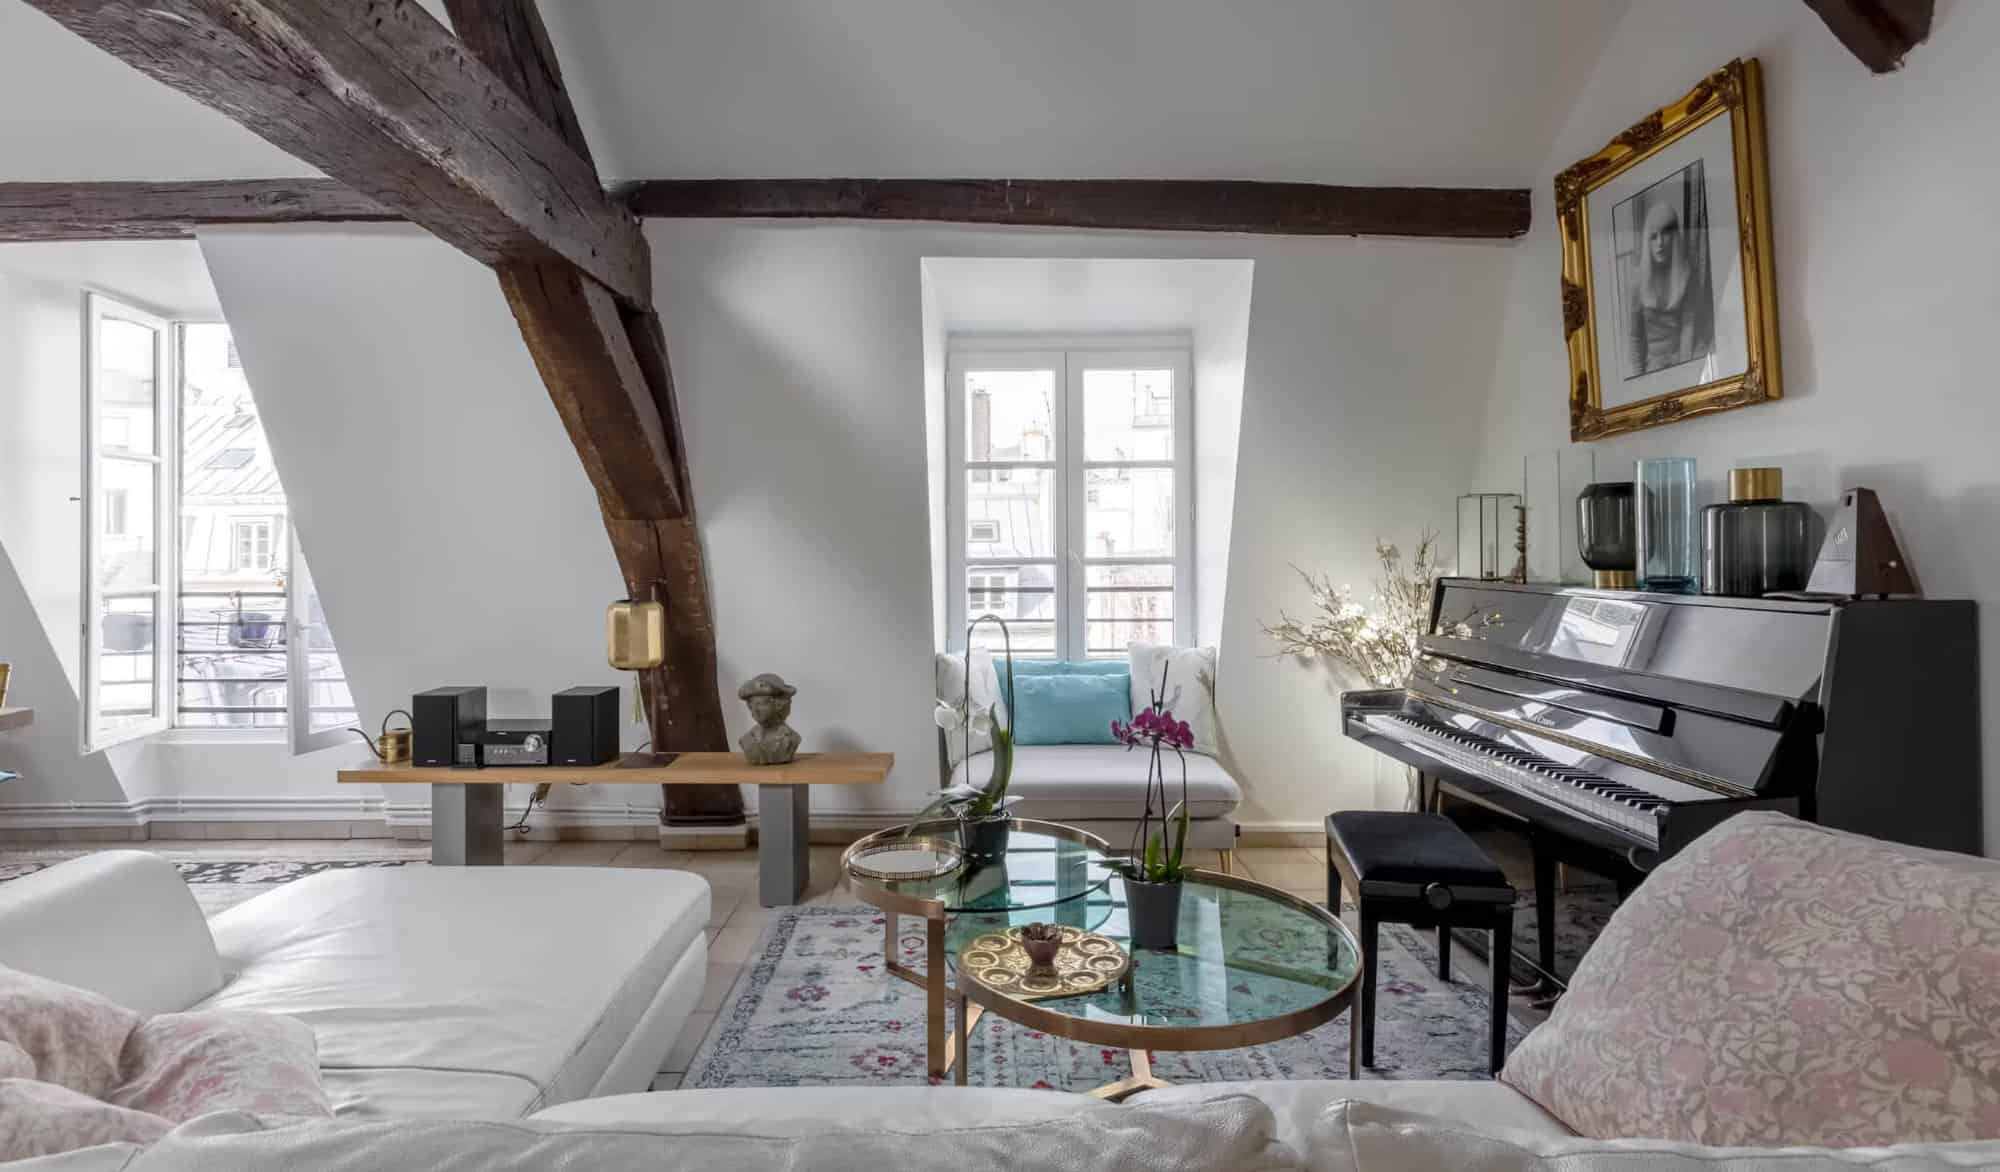 A Paris apartment with 2 windows overlooking the city. In it is a black piano and a white couch.